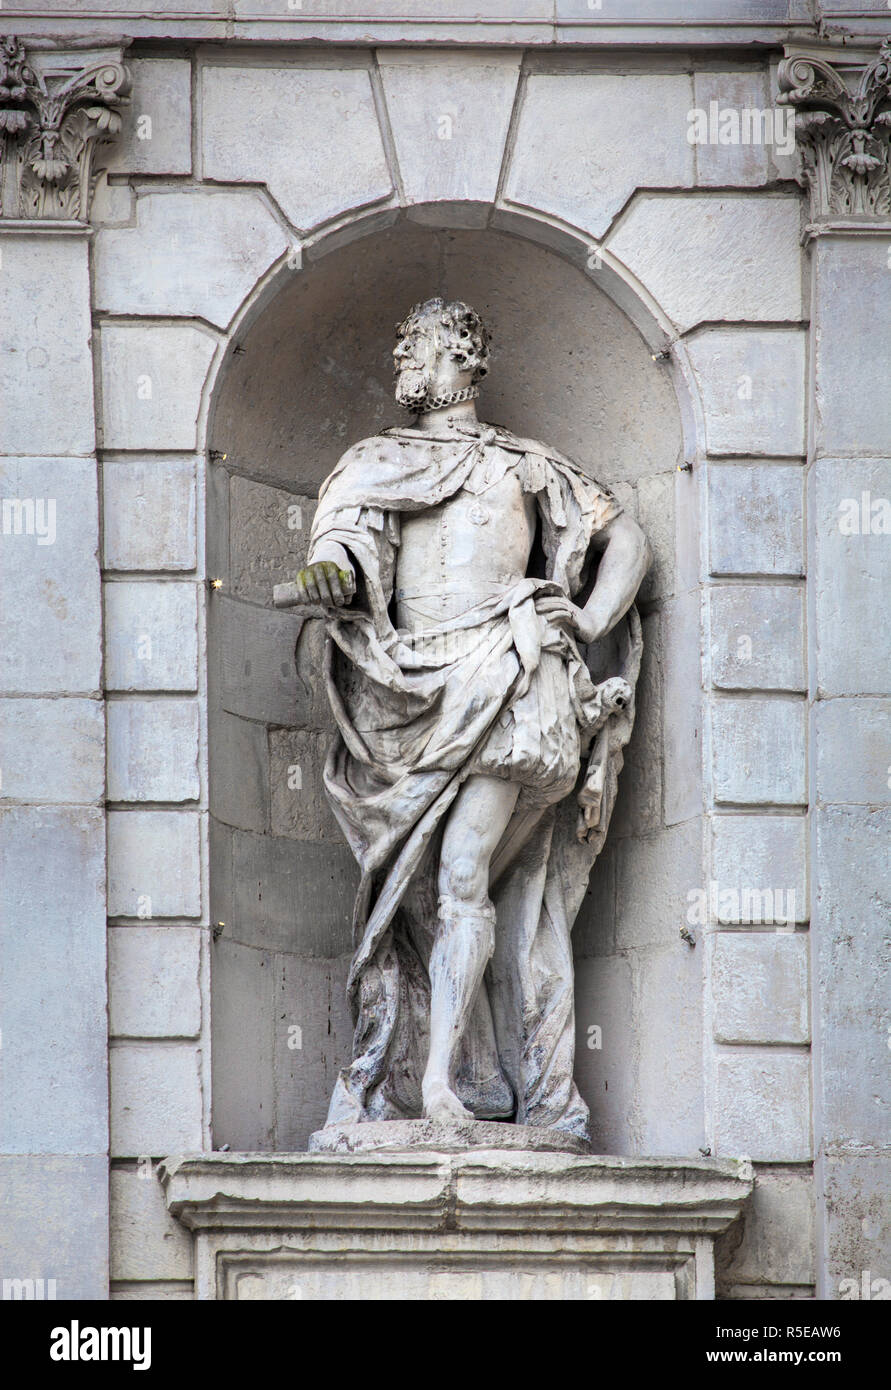 Statue of James 1st on the Temple Bar gateway which is now in Paternoster Square, London Stock Photo